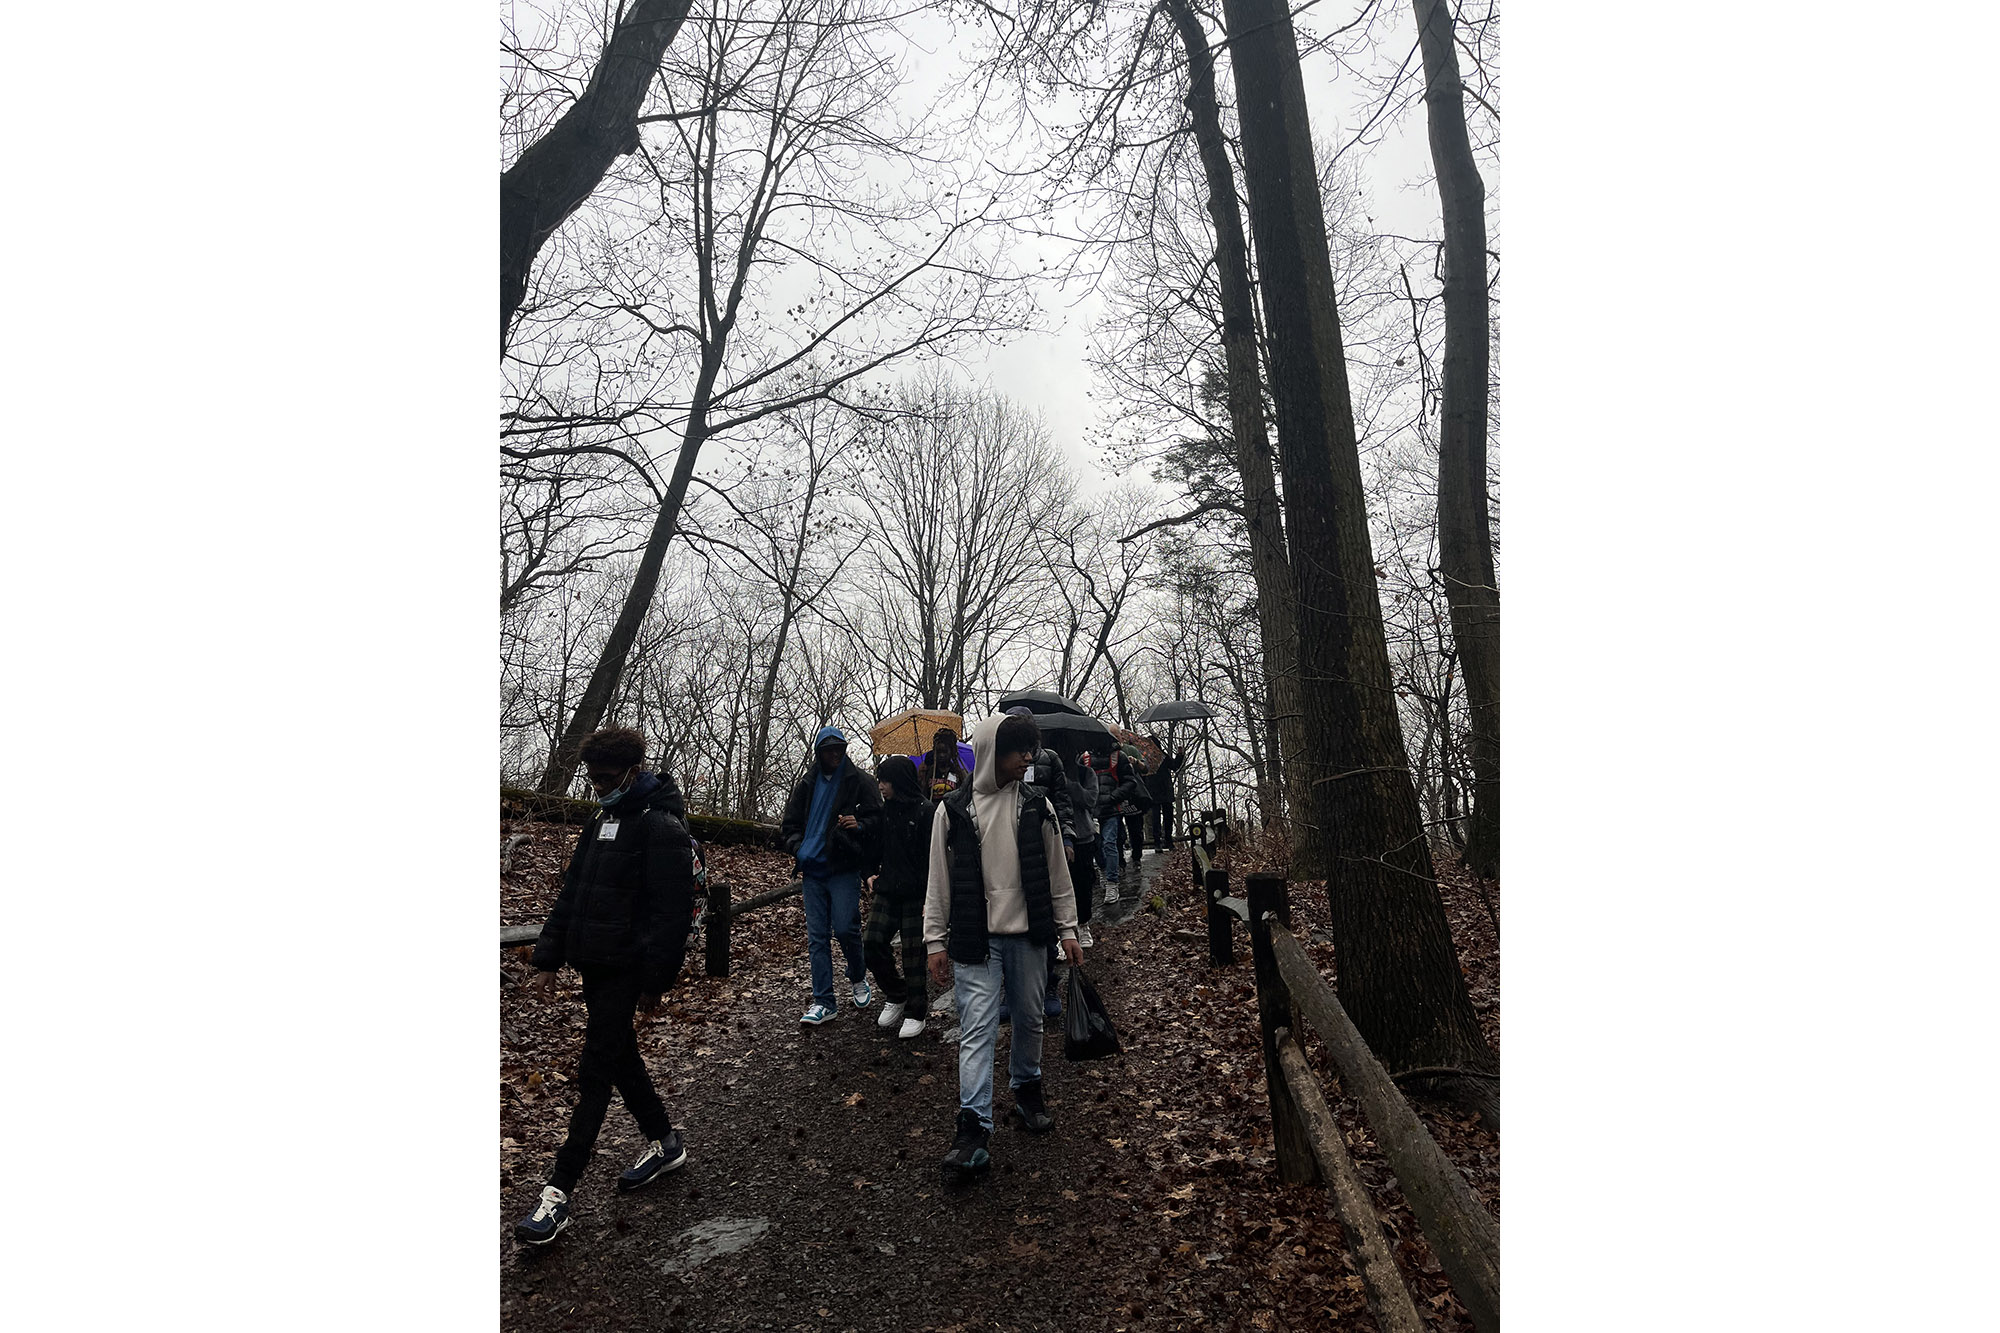 High school students explore a forest on a gray day